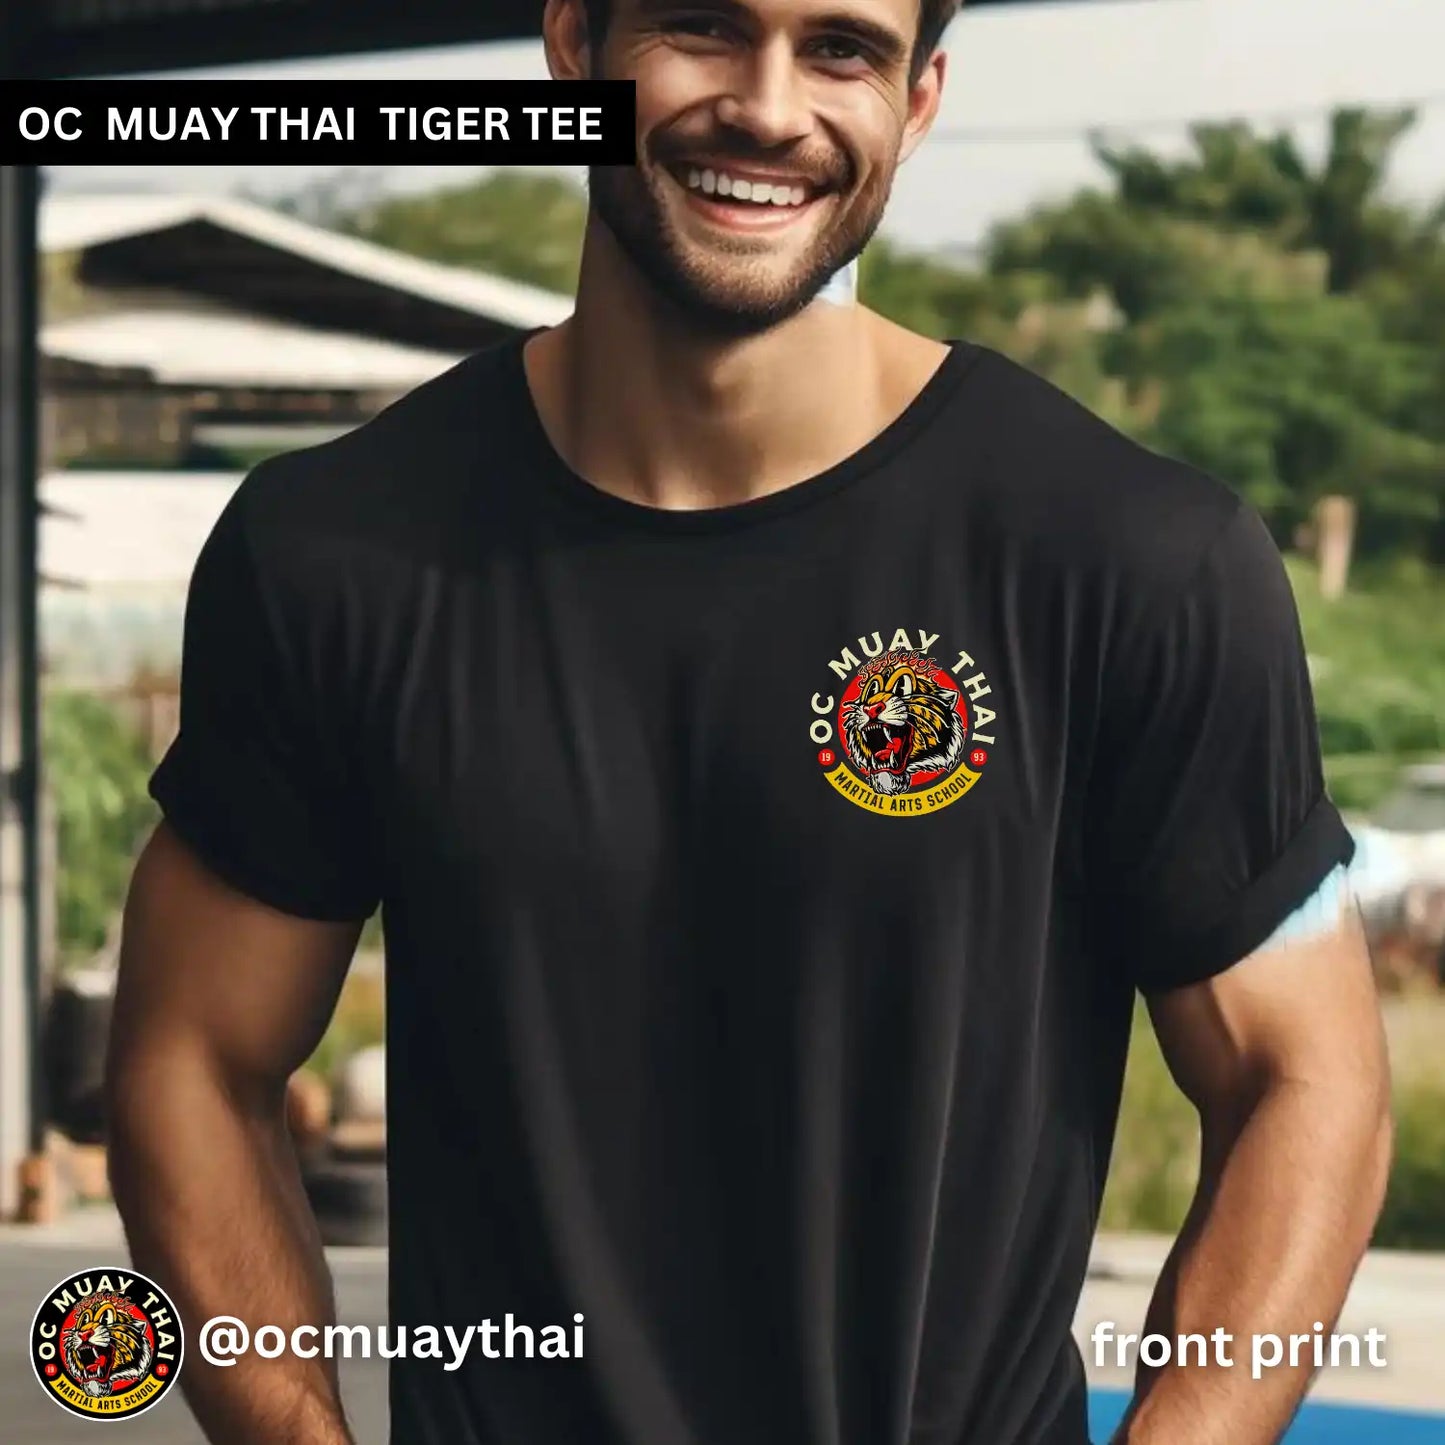 OC Muay Thai Bold Tiger Tattoo Style T-Shirt - Multicolor Front and Back Print Tee